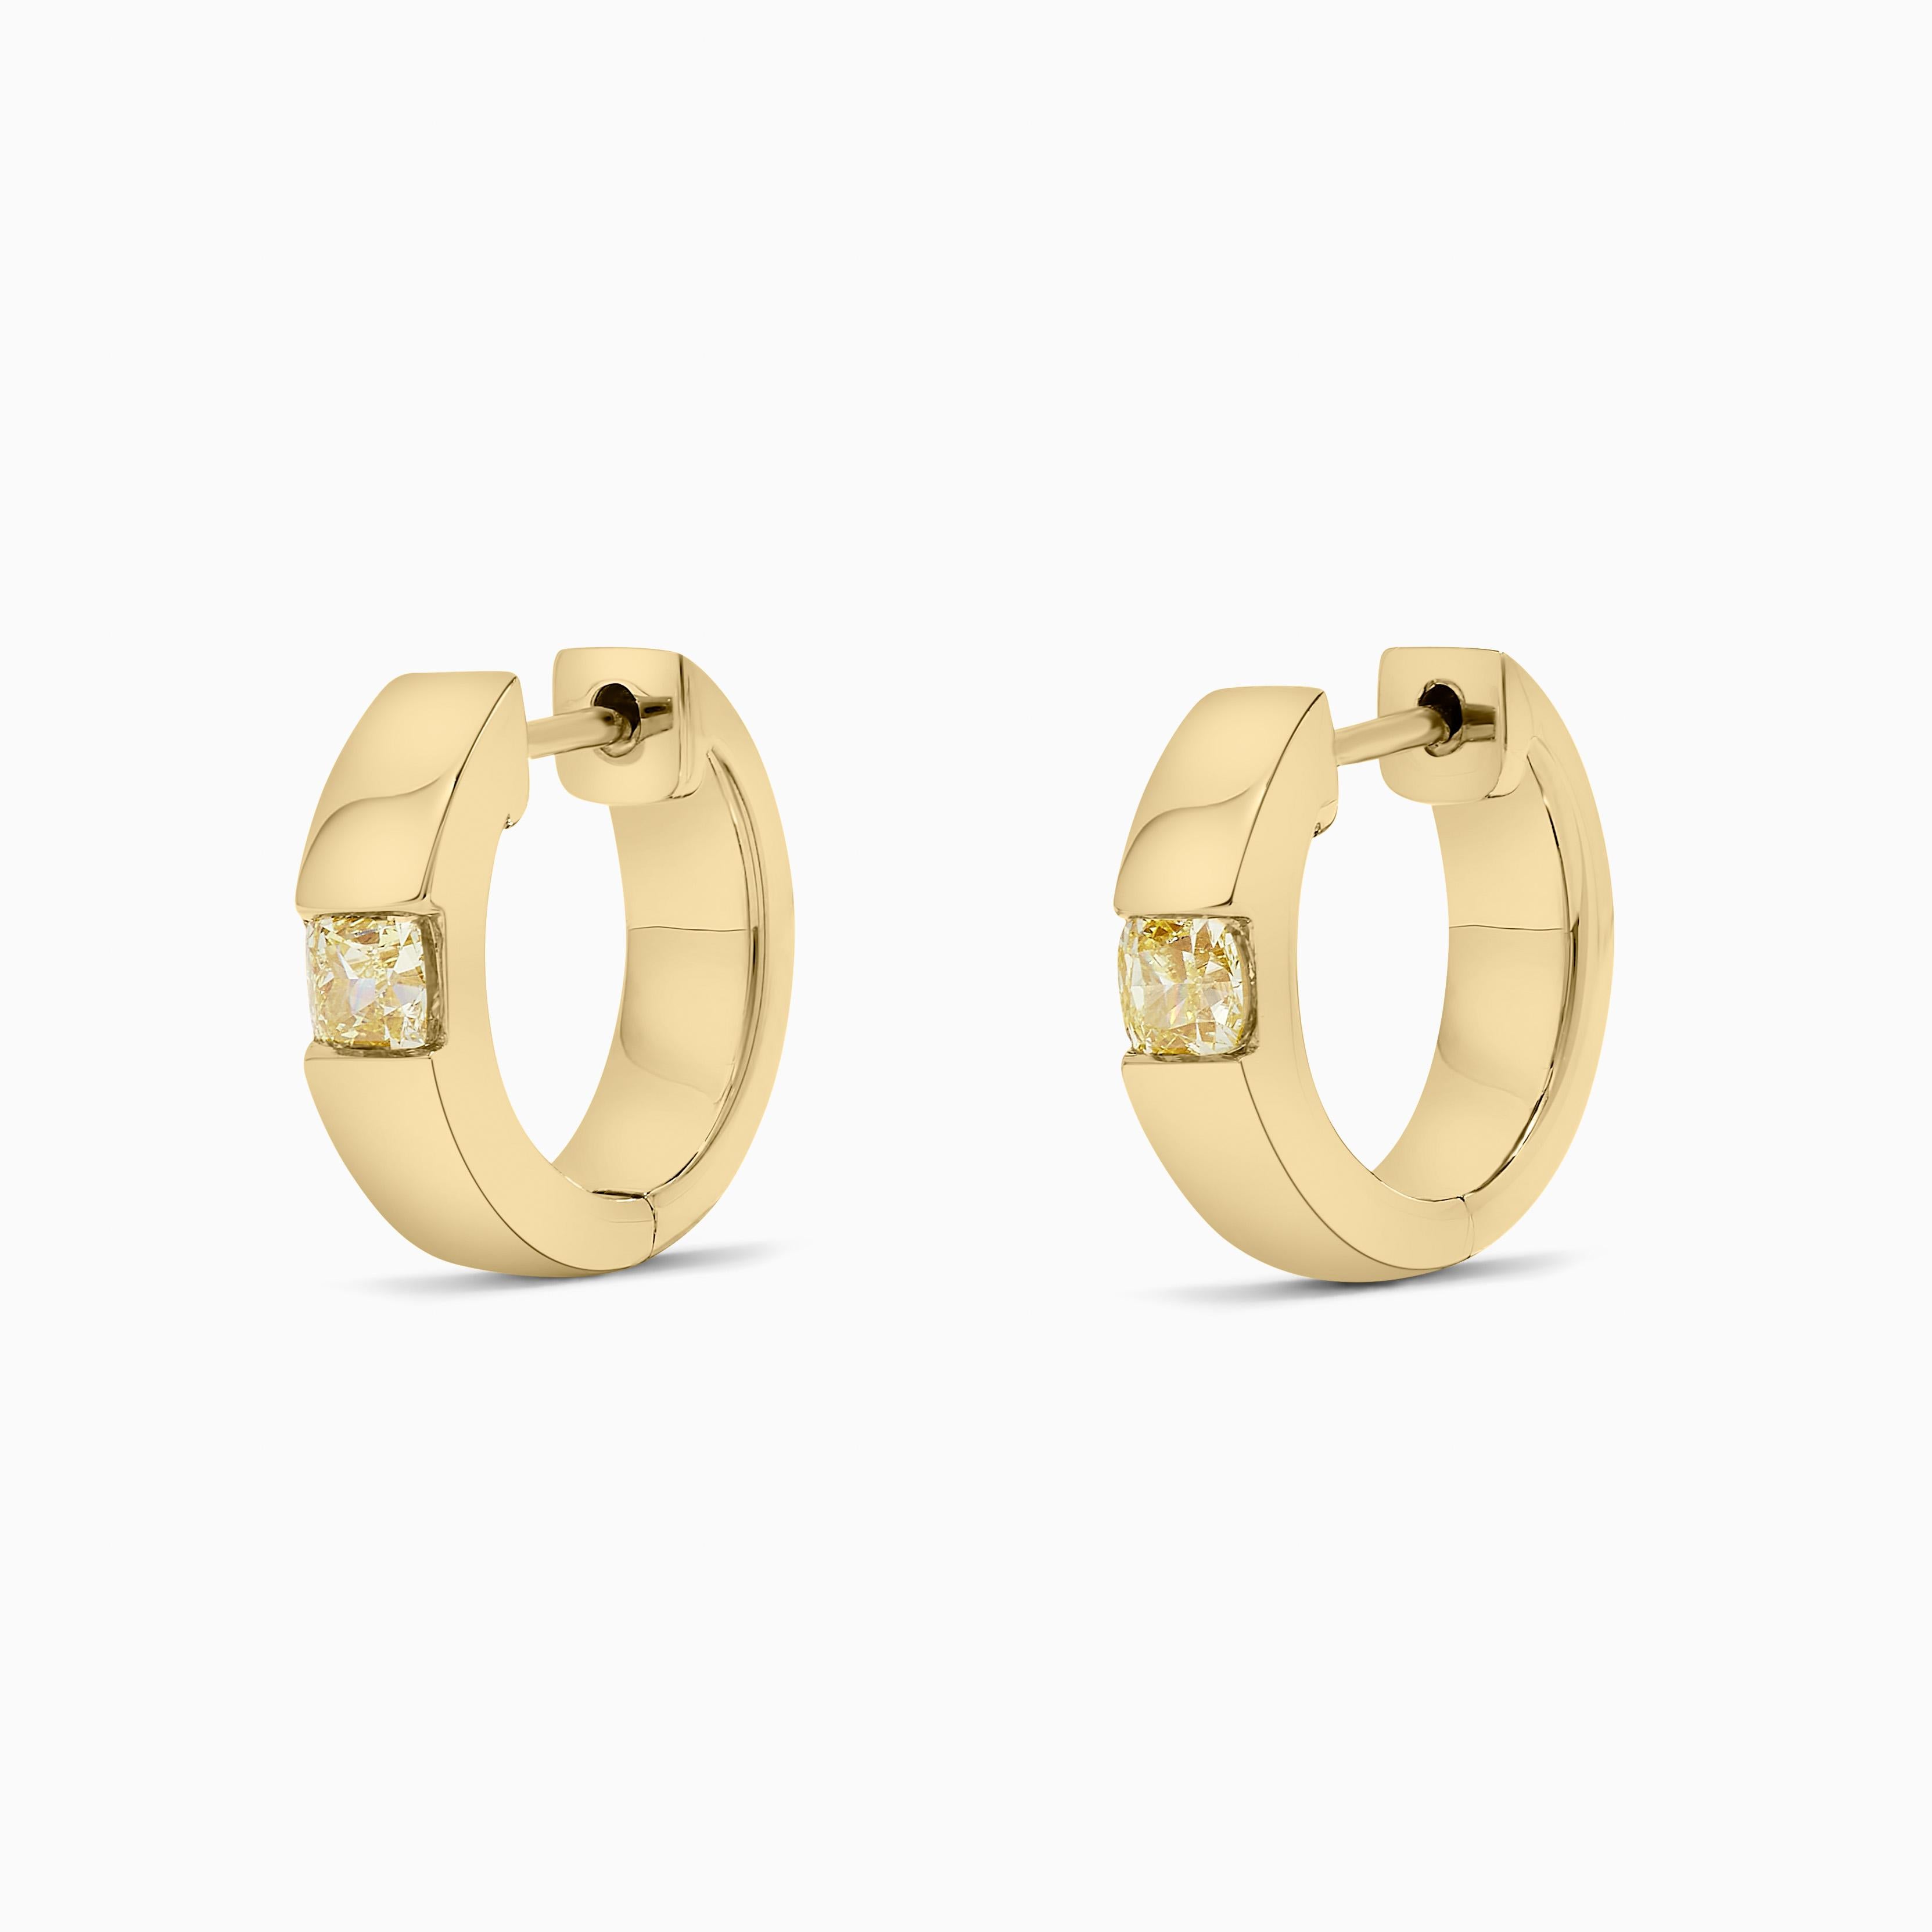 RareGemWorld's classic diamond earrings. Mounted in a beautiful 18K Yellow Gold setting with natural cushion cut yellow diamonds. These earrings are guaranteed to impress and enhance your personal collection!

Total Weight: .60cts

Width: 14.7